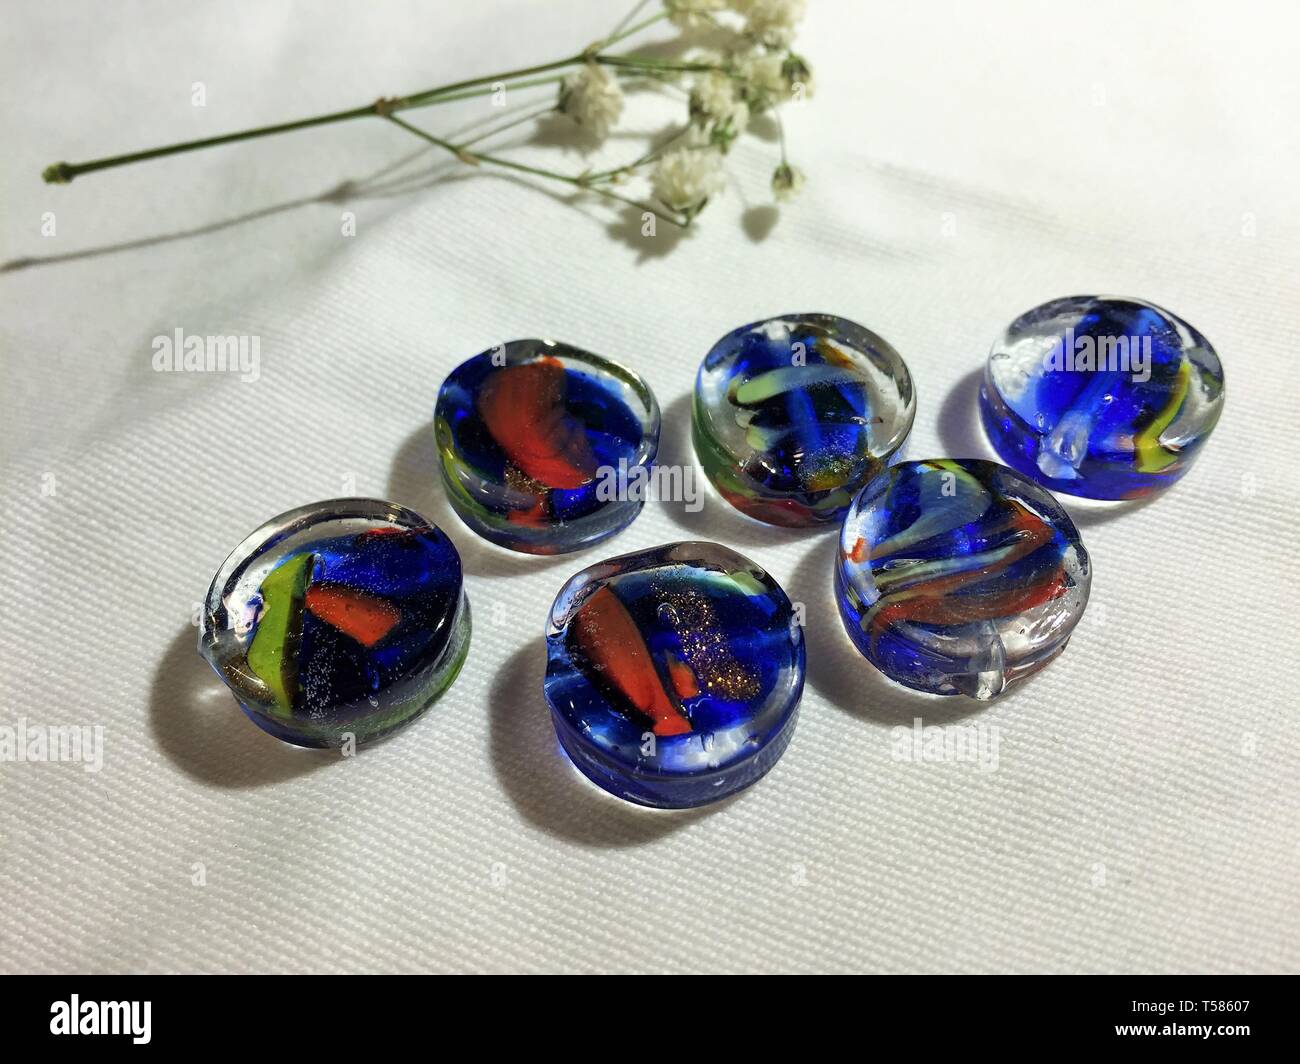 Blue, yellow, and clear glass beads Stock Photo